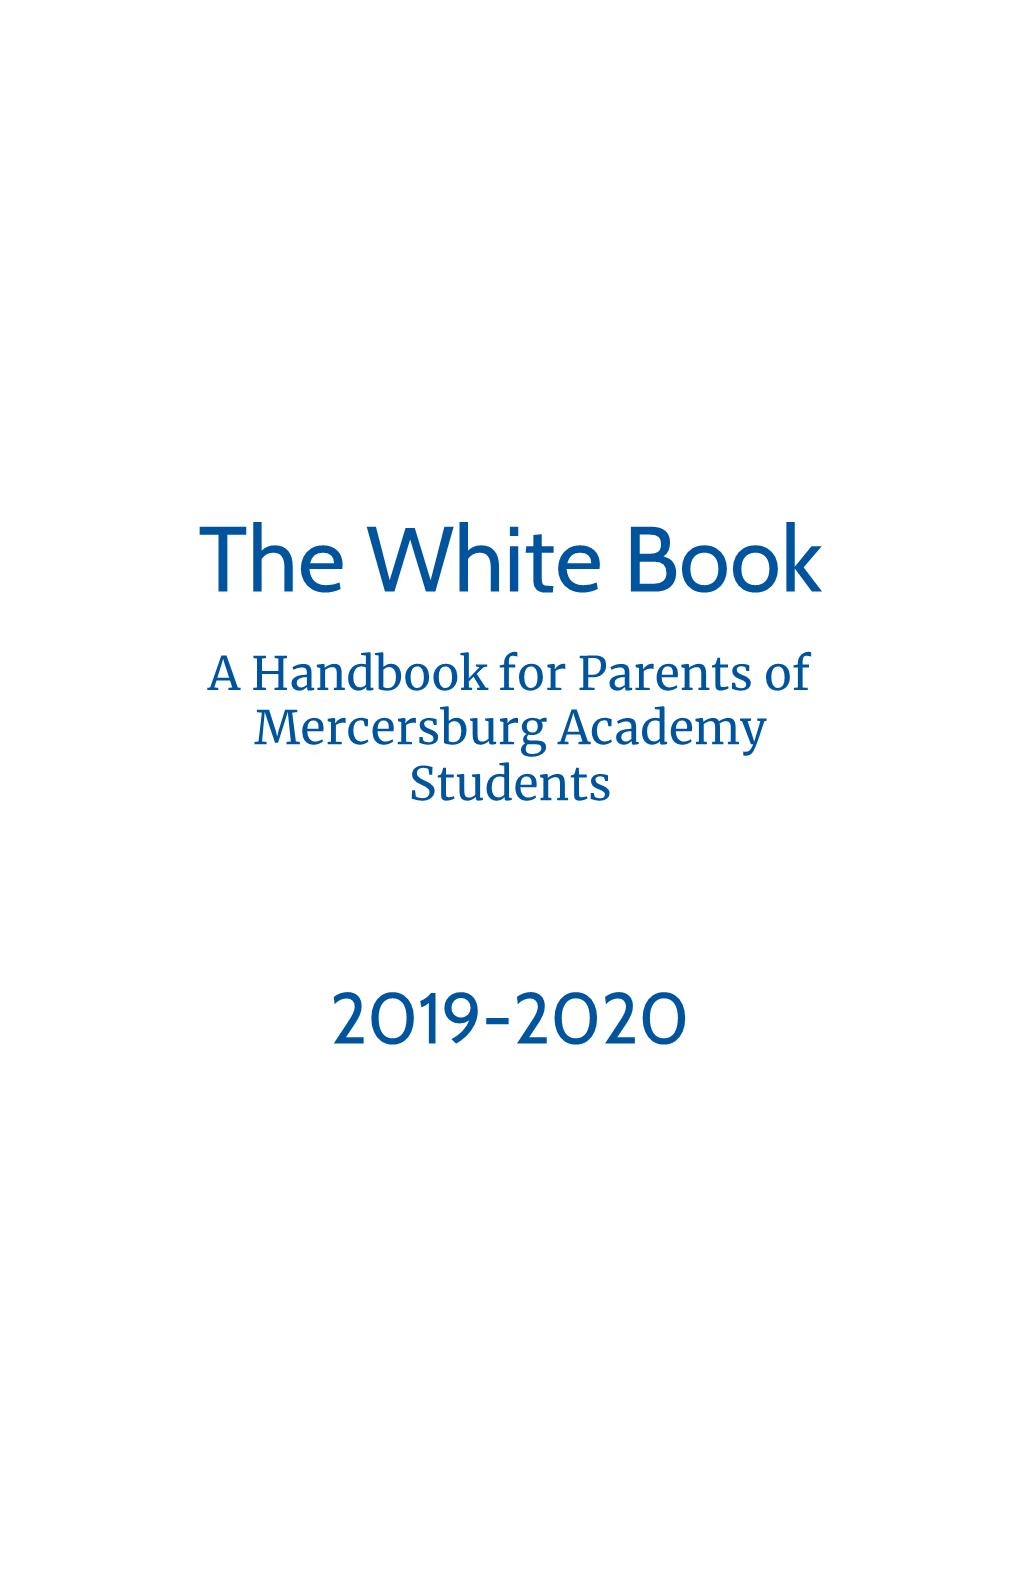 The White Book a Handbook for Parents of Mercersburg Academy Students